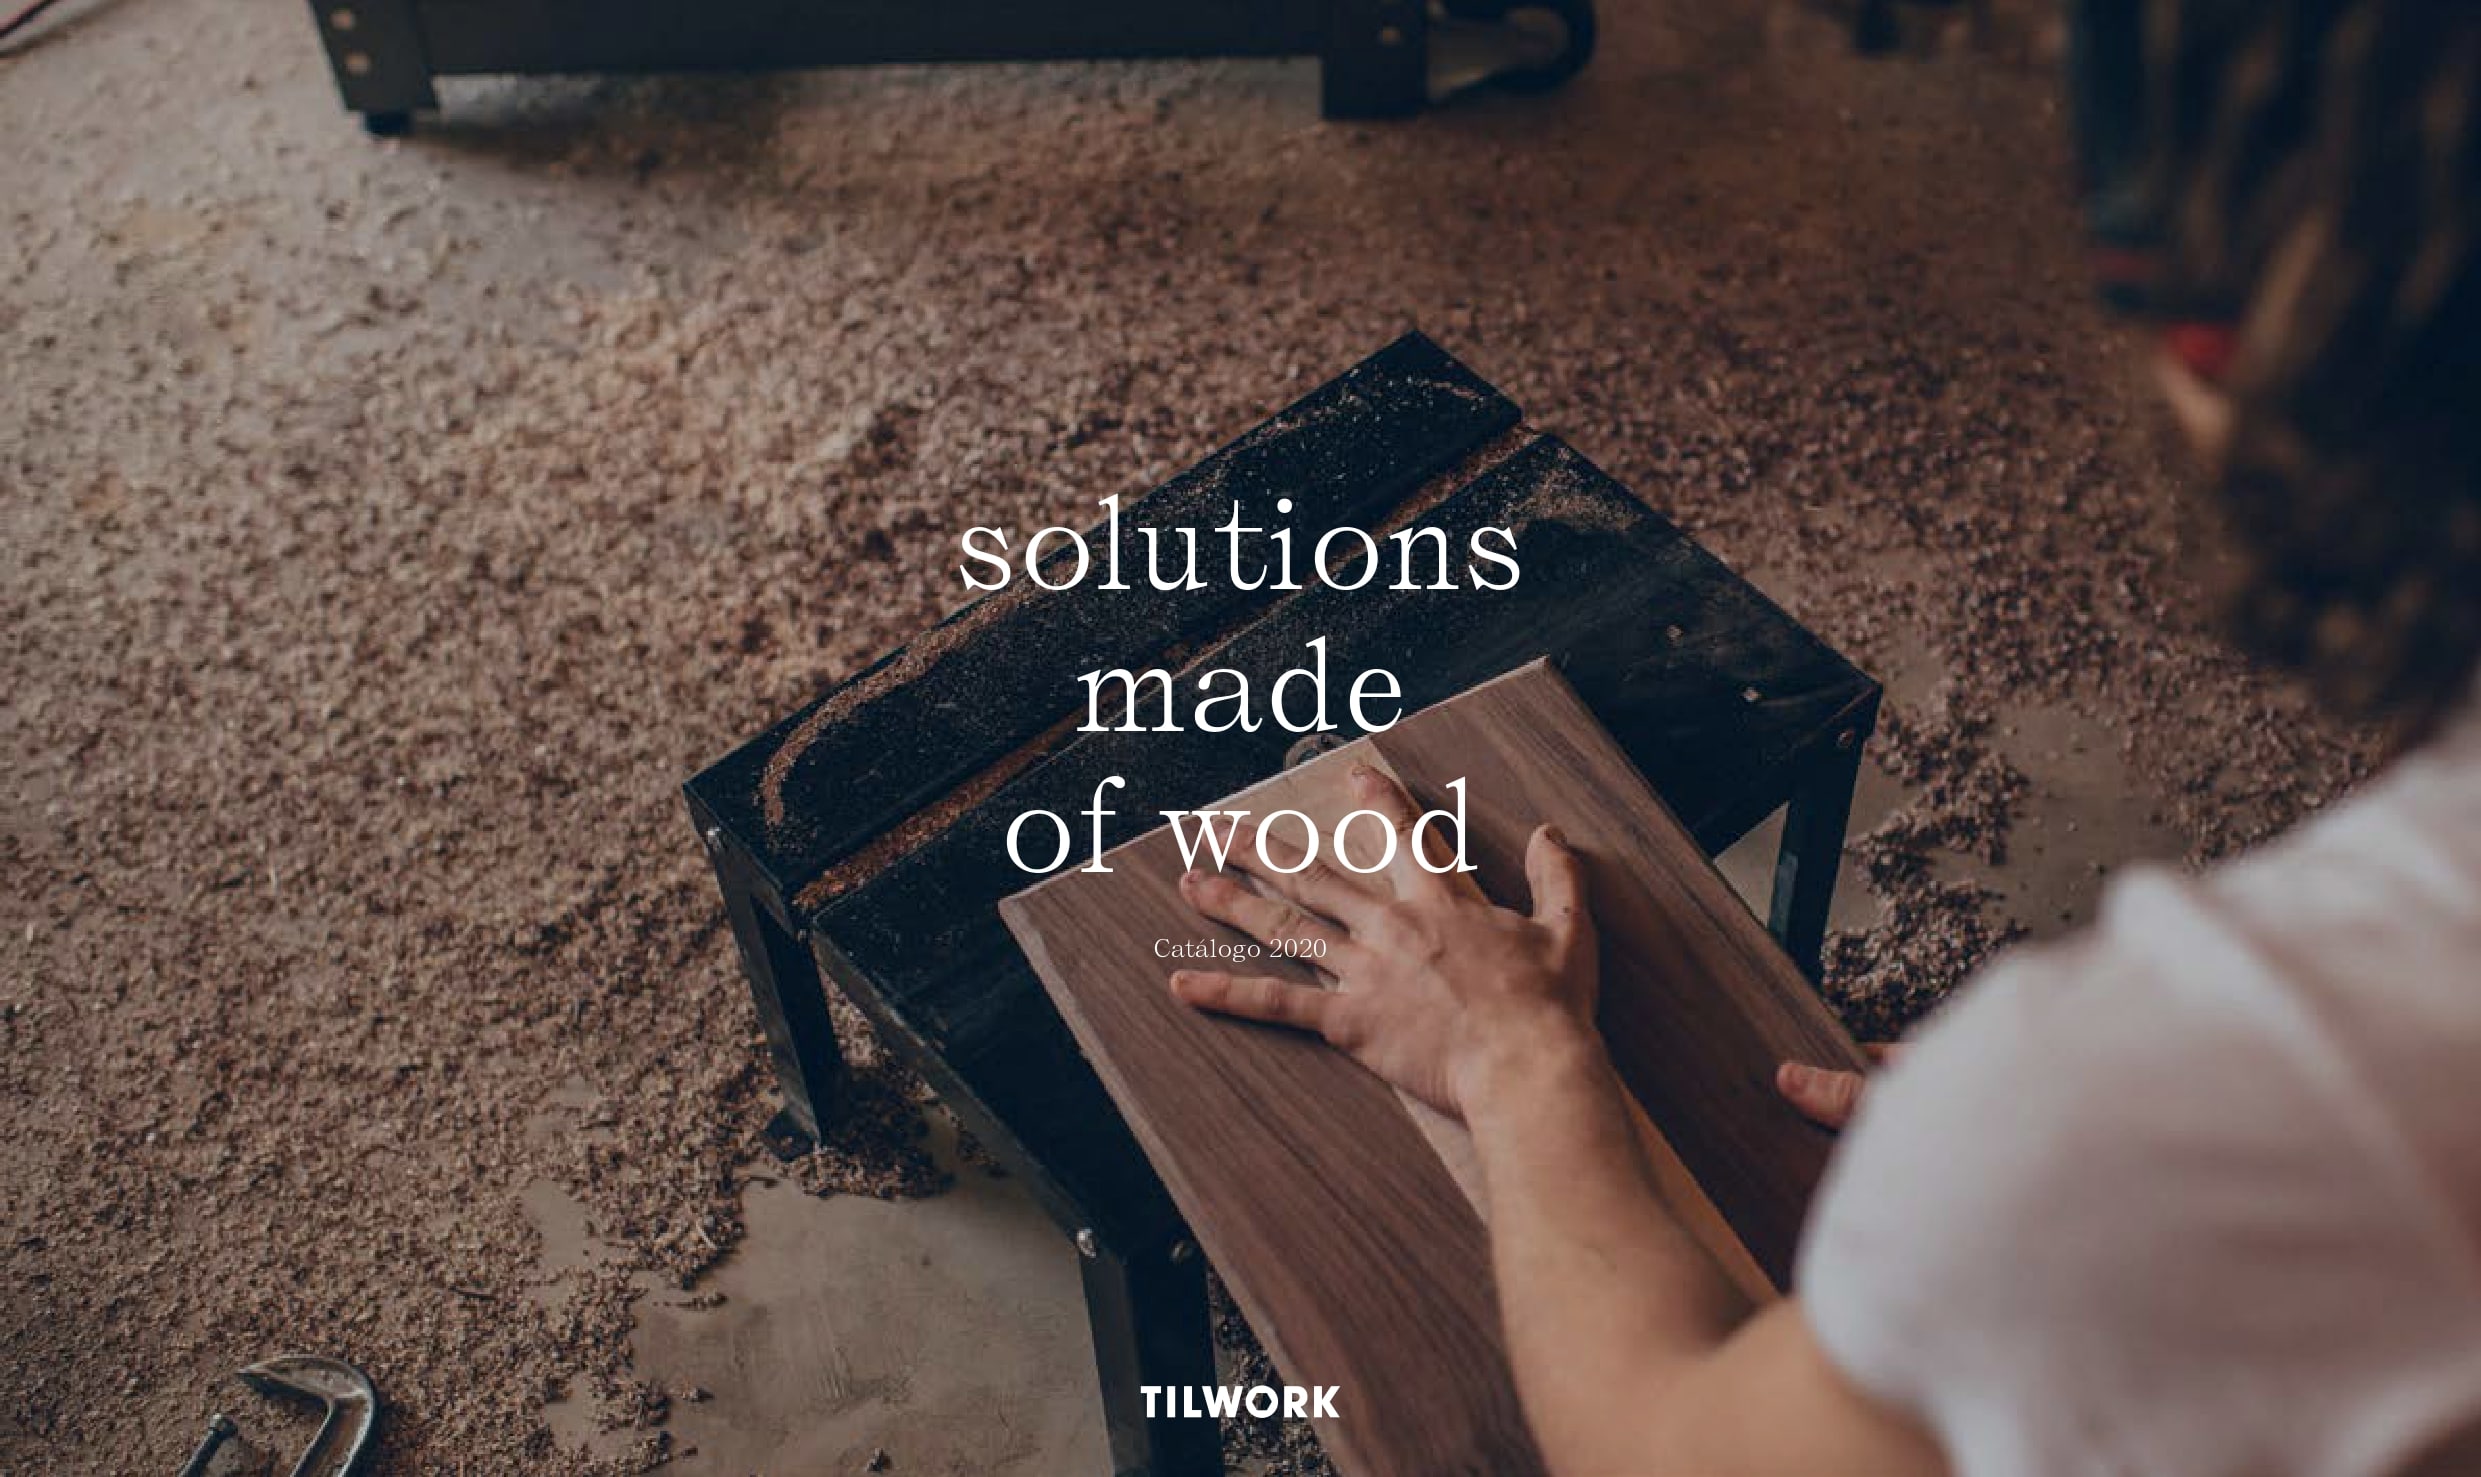 Tilwork solutions made of wood